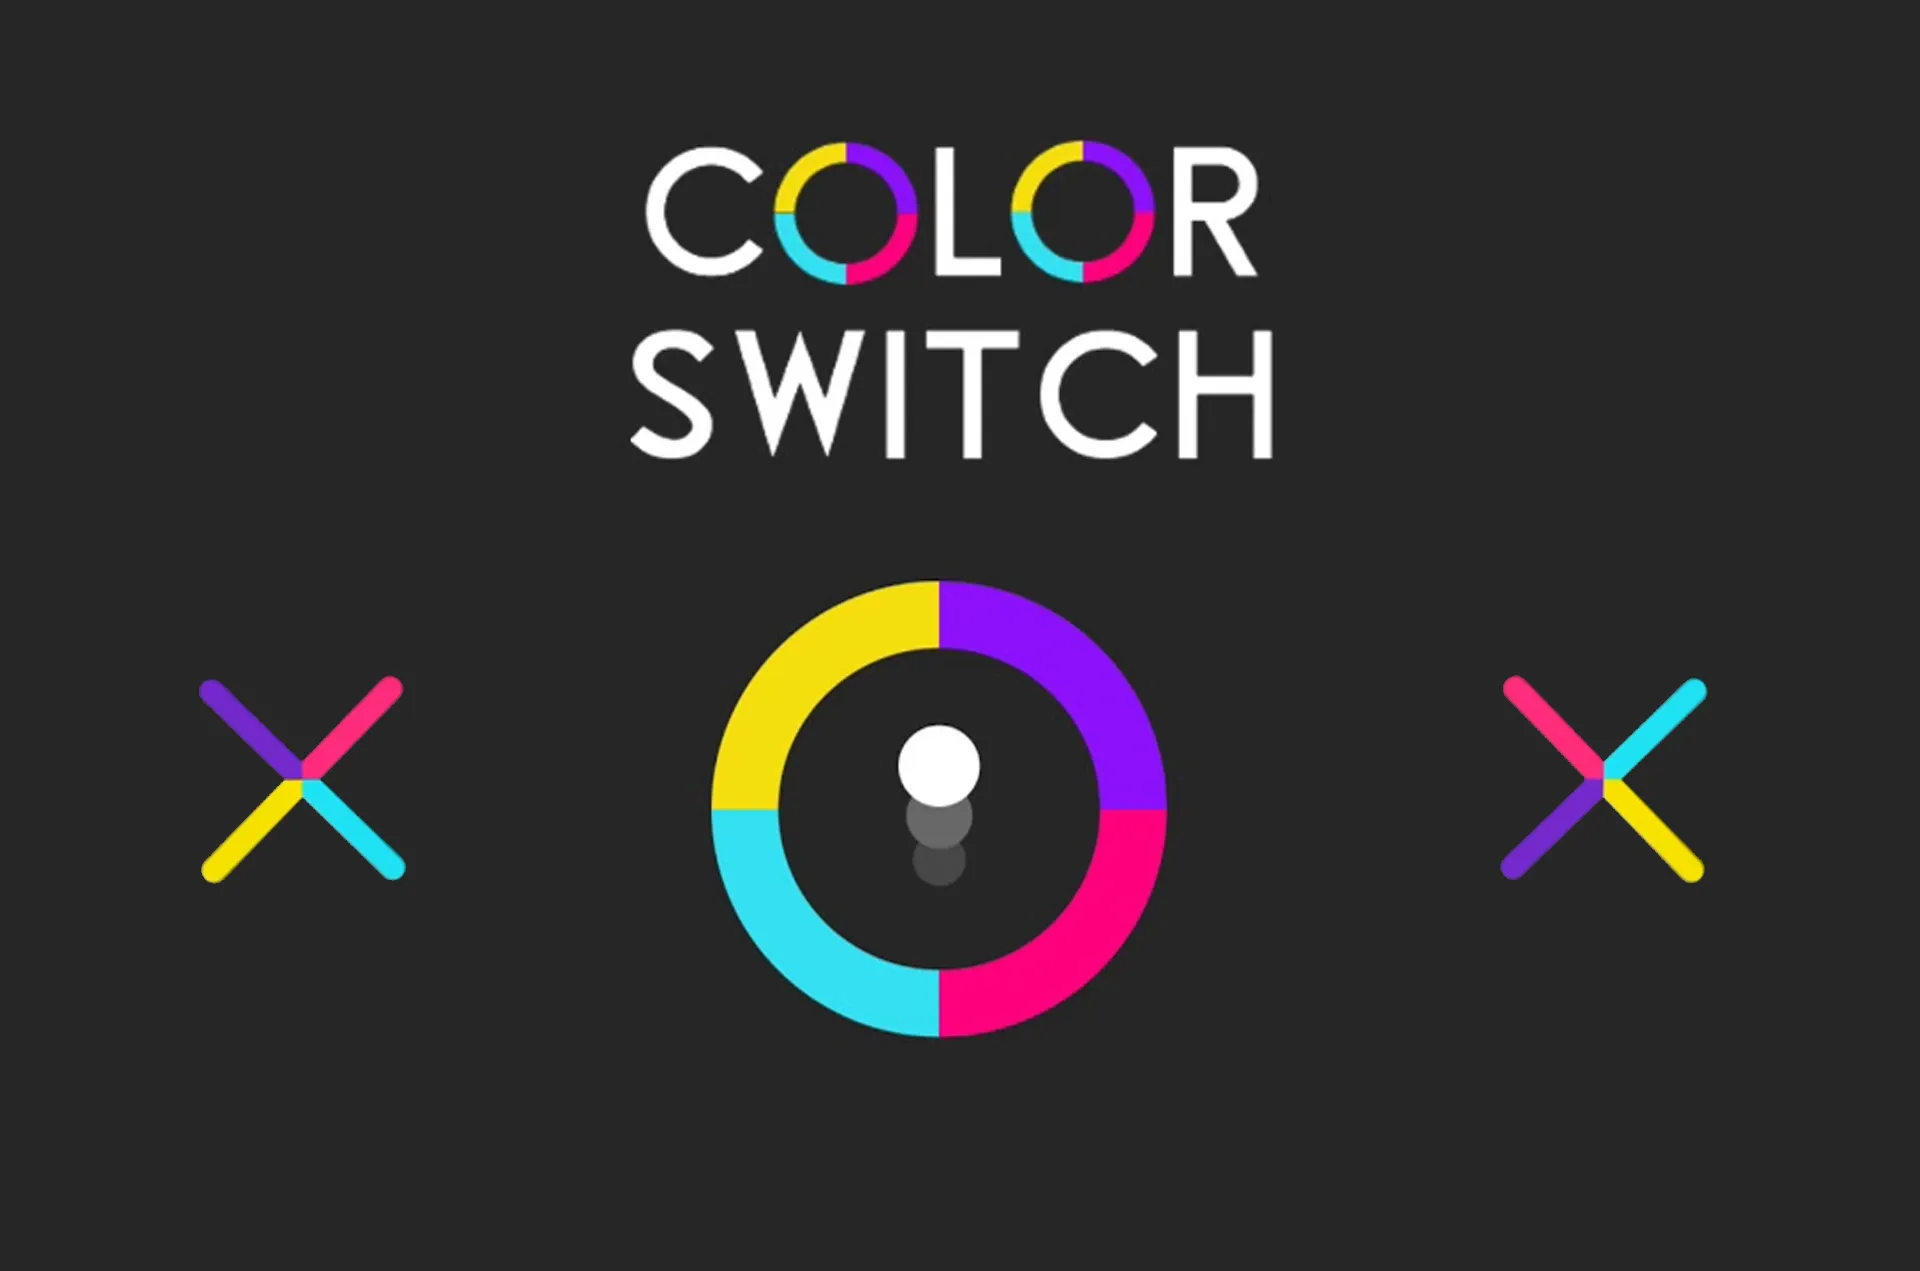 Presenting you the Color Switch